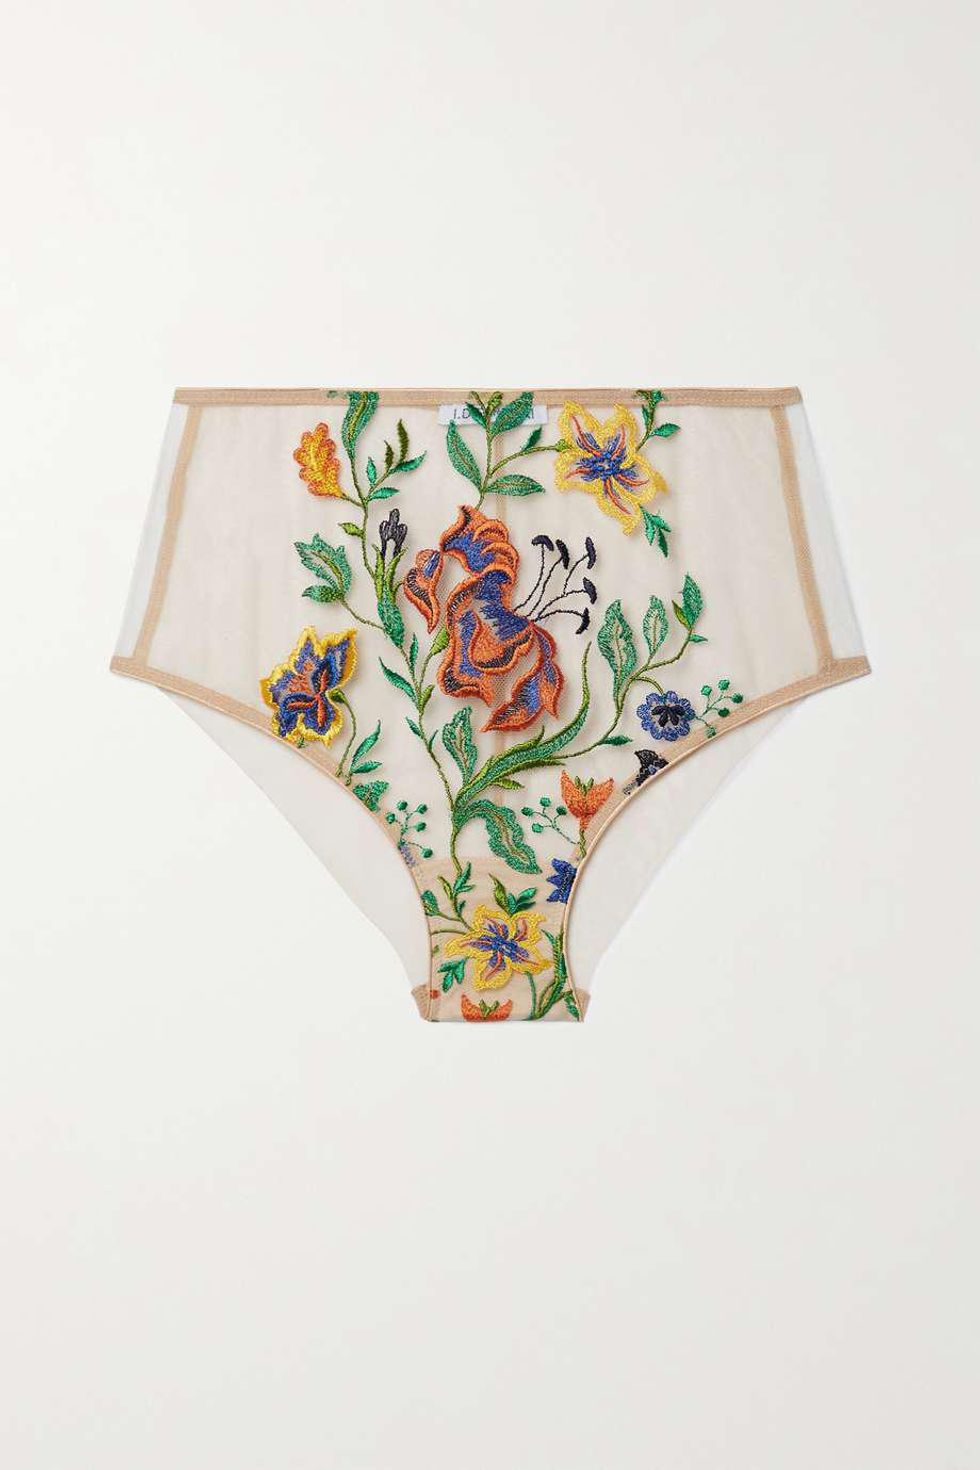 How To Wear The Visible Underwear Trend - Coveteur: Inside Closets,  Fashion, Beauty, Health, and Travel